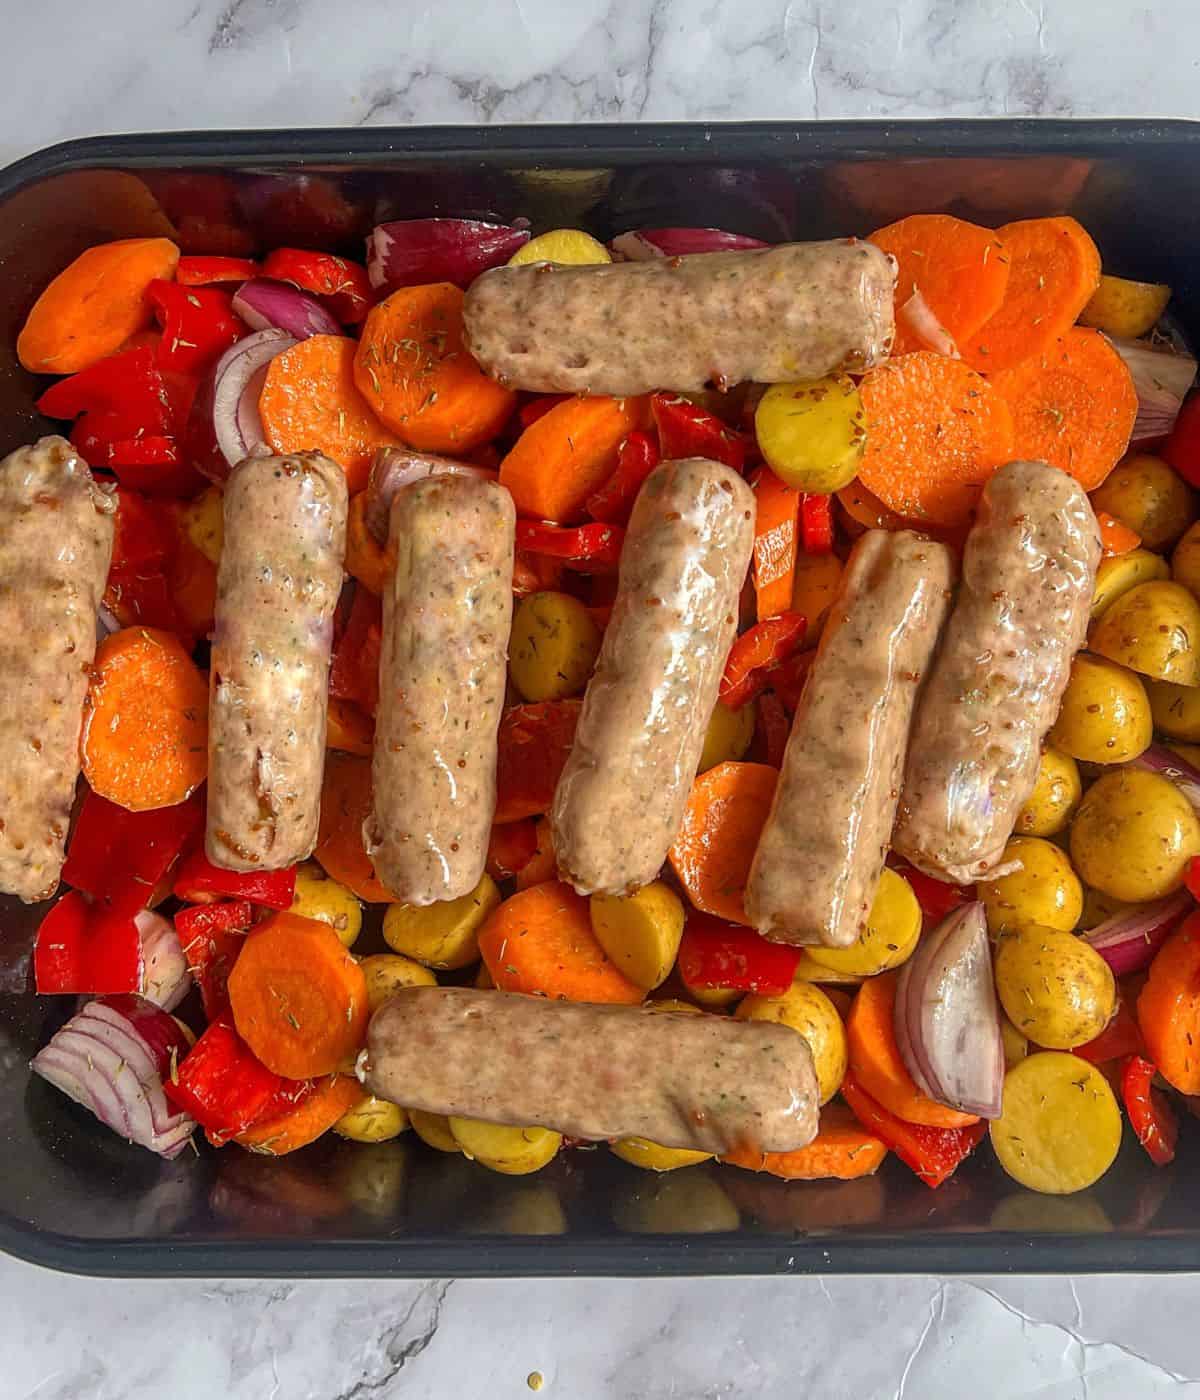 Raw sausages sitting on top of potatoes, carrot, red onions and peppers in a roasting tin.